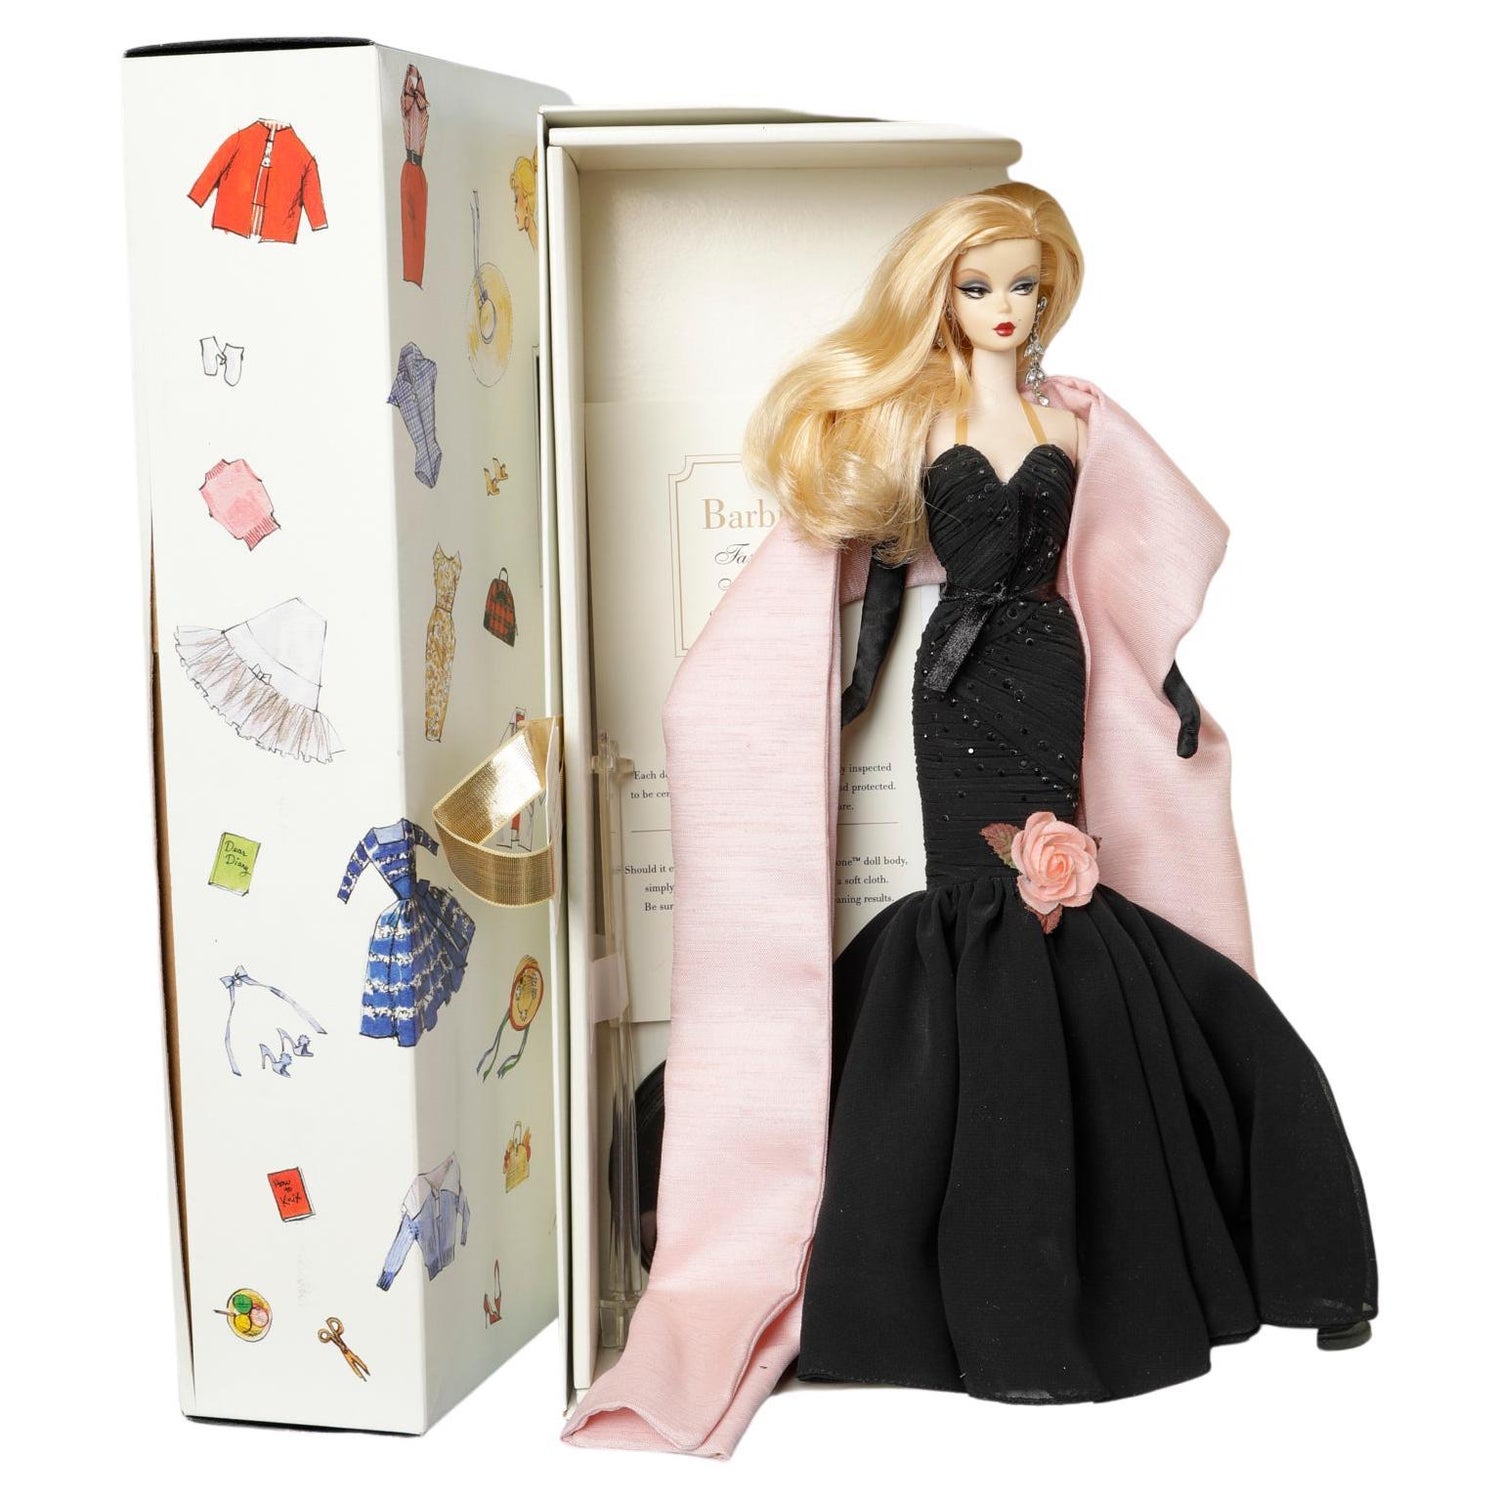 Barbie Fashion Model/ "Capucine" / Limited Edition For Sale at 1stDibs